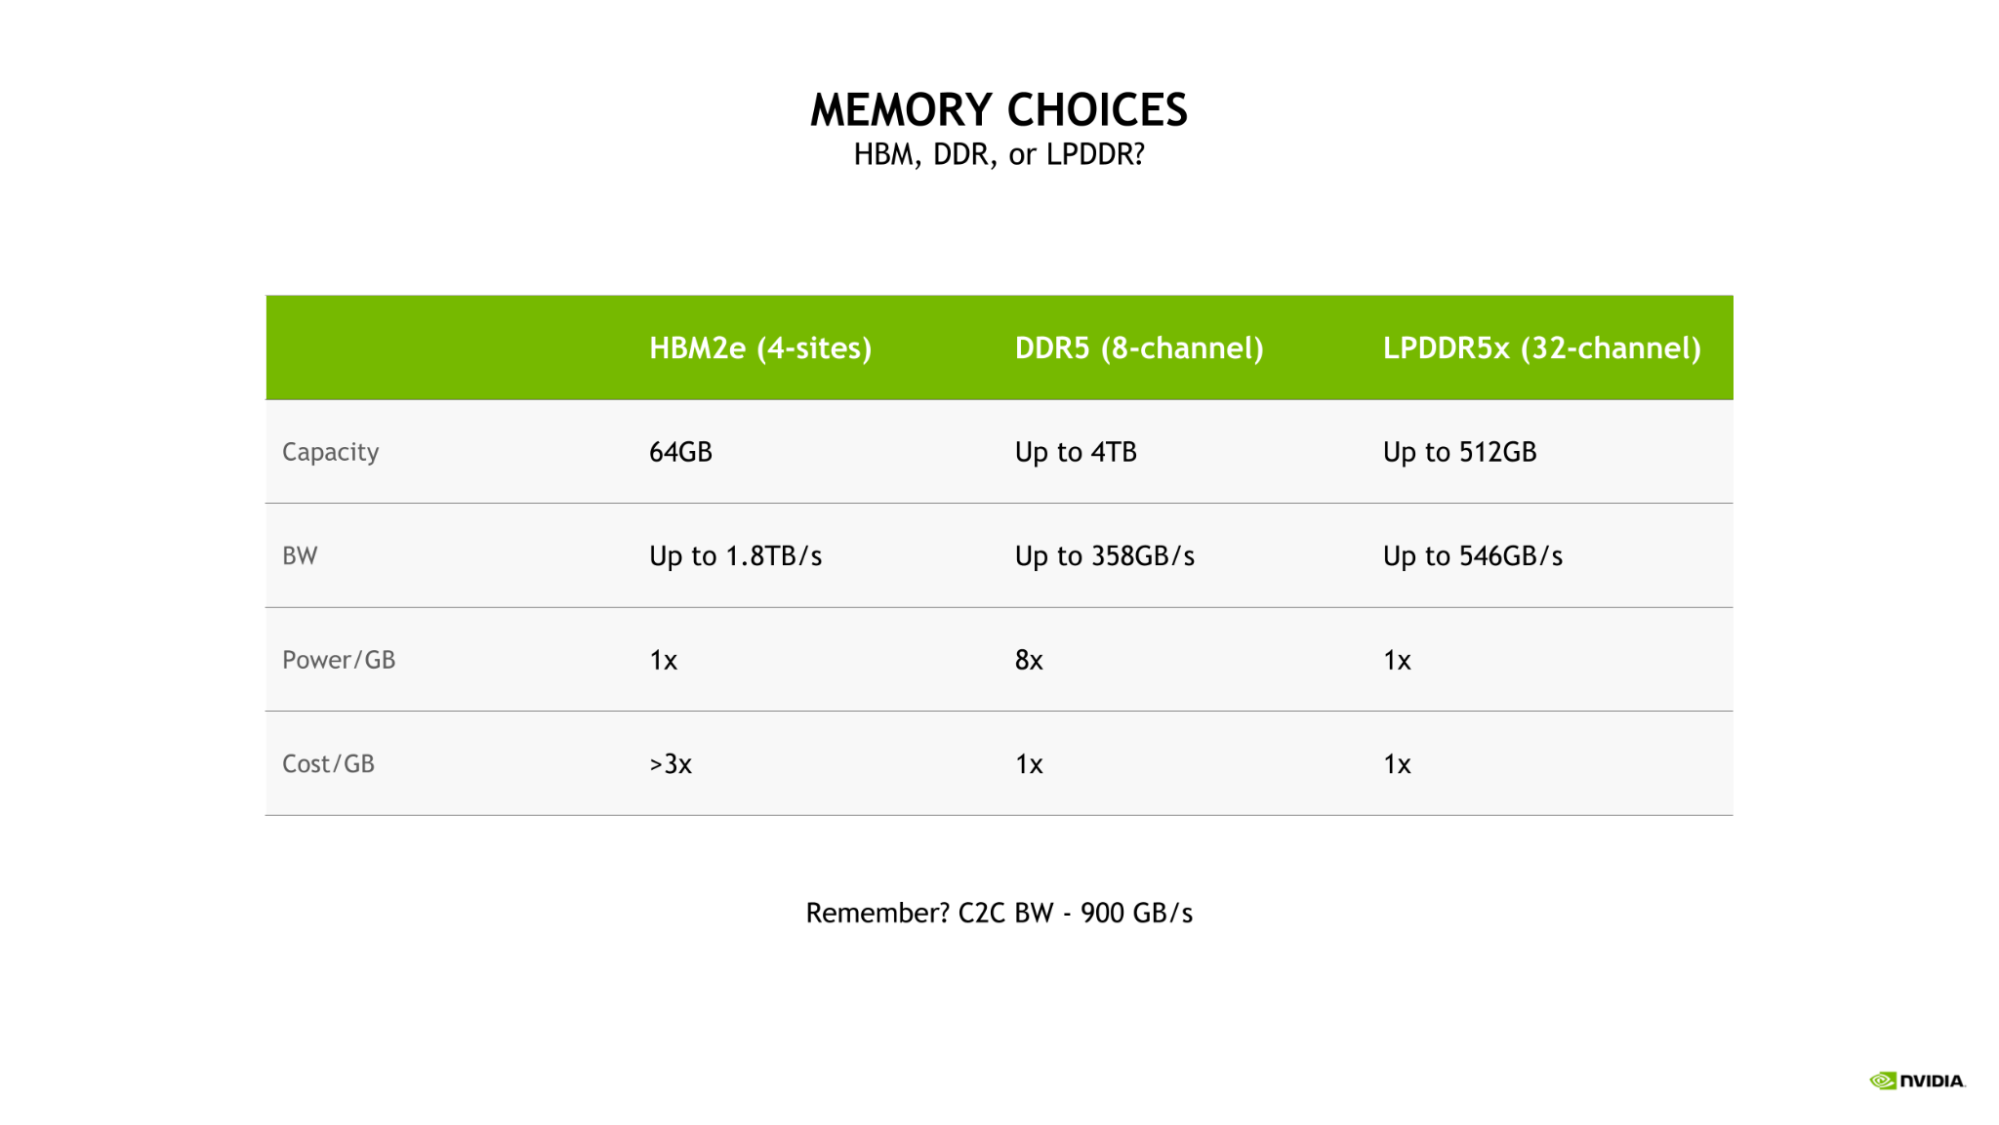 Capacity, bandwidth, power and cost comparison of HBM2e, DDR5 (8-channel), and LPDDR5x (32-channel) memory options. 